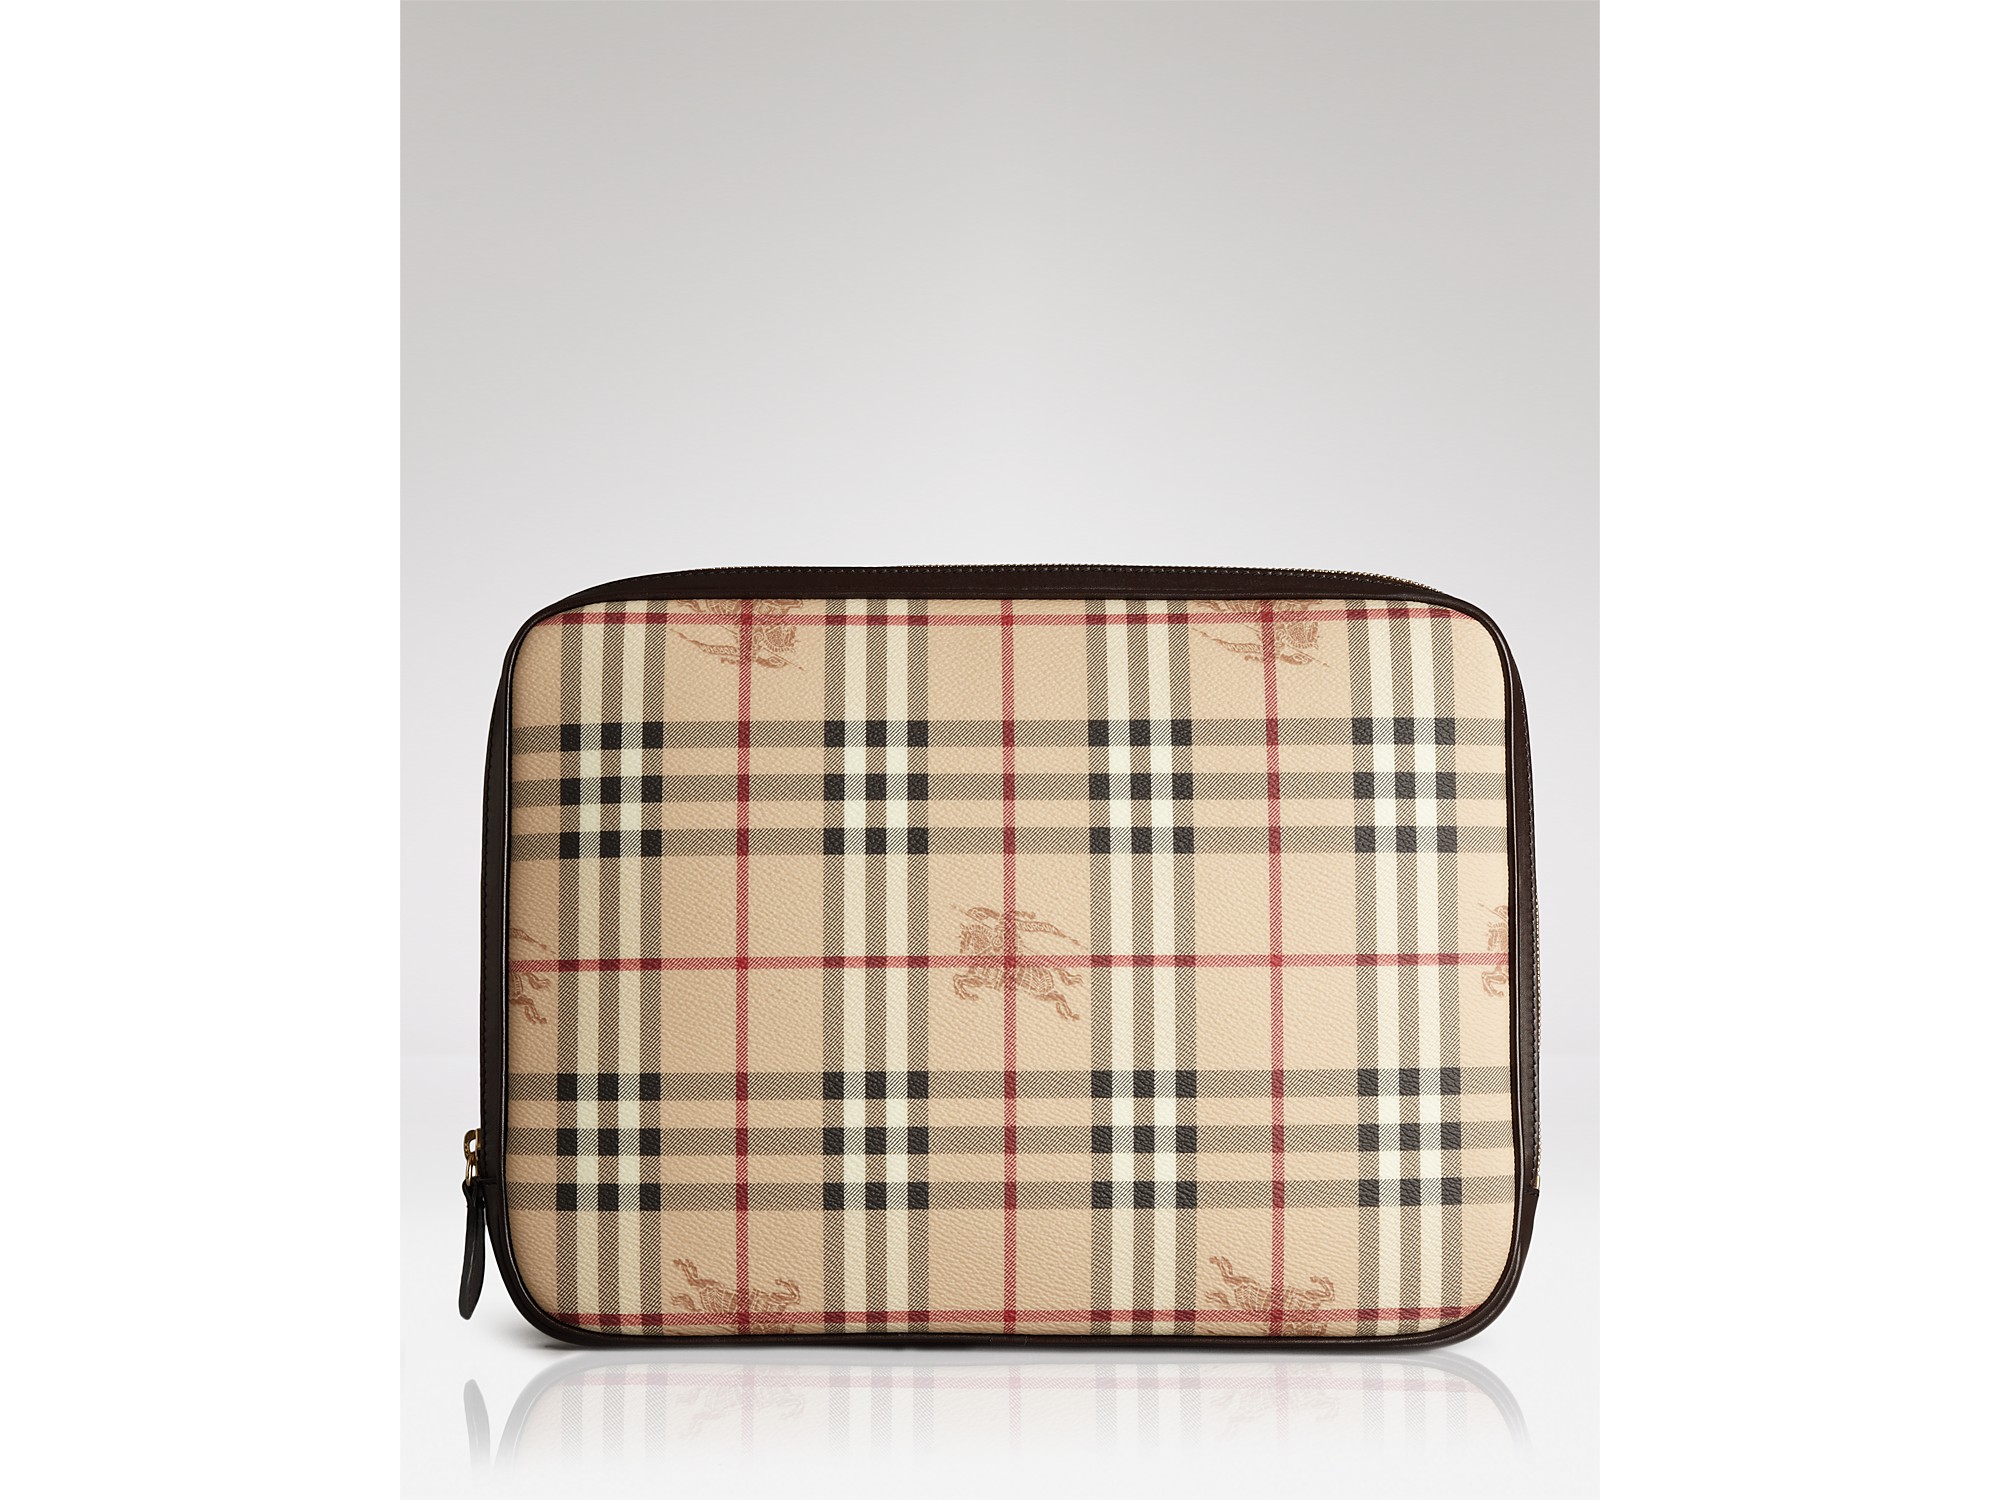 Burberry Checked 13 Laptop Sleeve in Chocolate (Brown) - Lyst